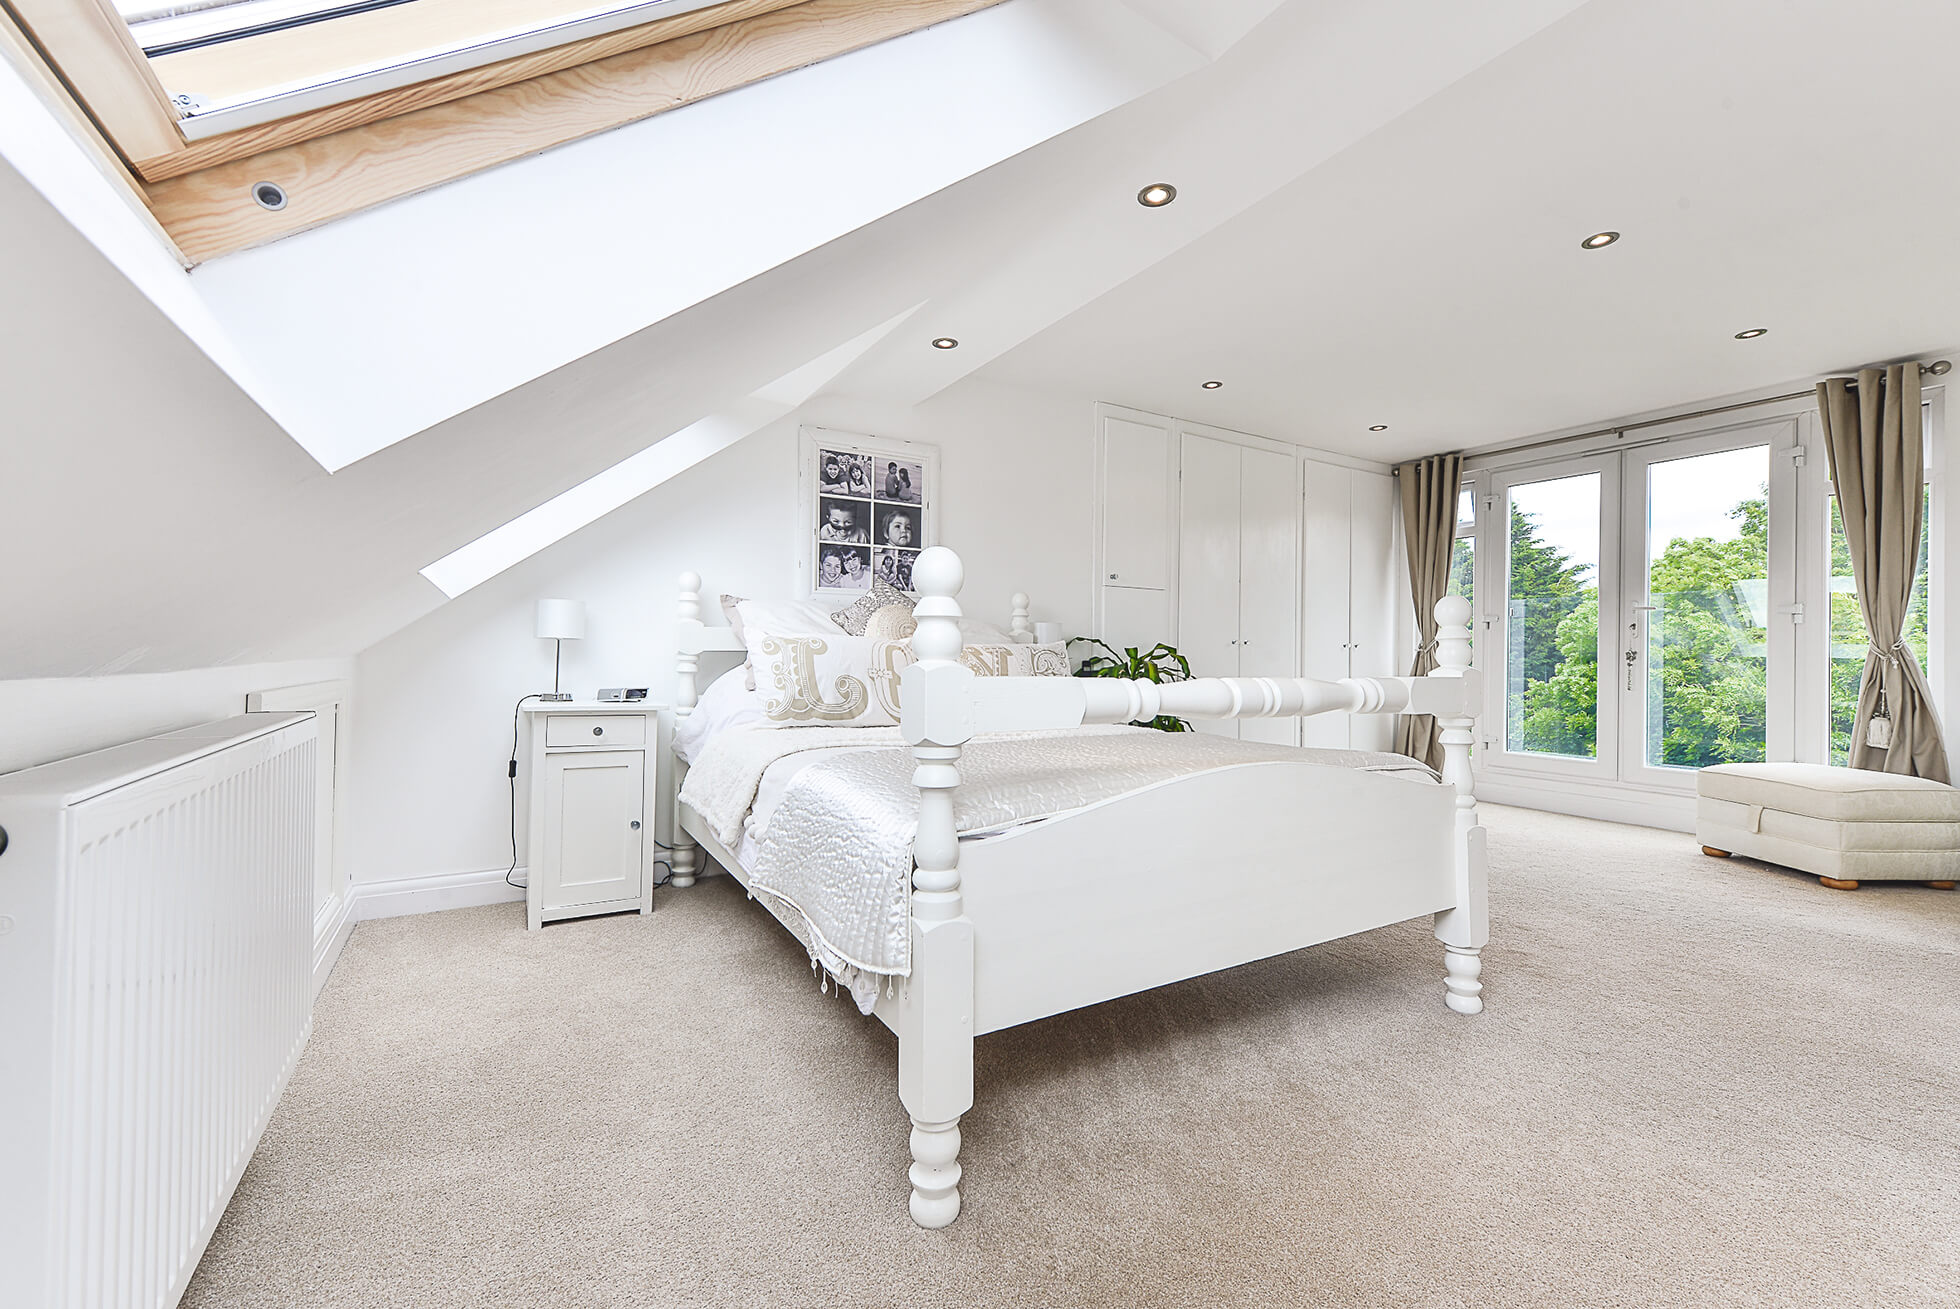 Do you have a question about converting your Loft in Kings Walden? Here are the most popular questions asked by our clients.